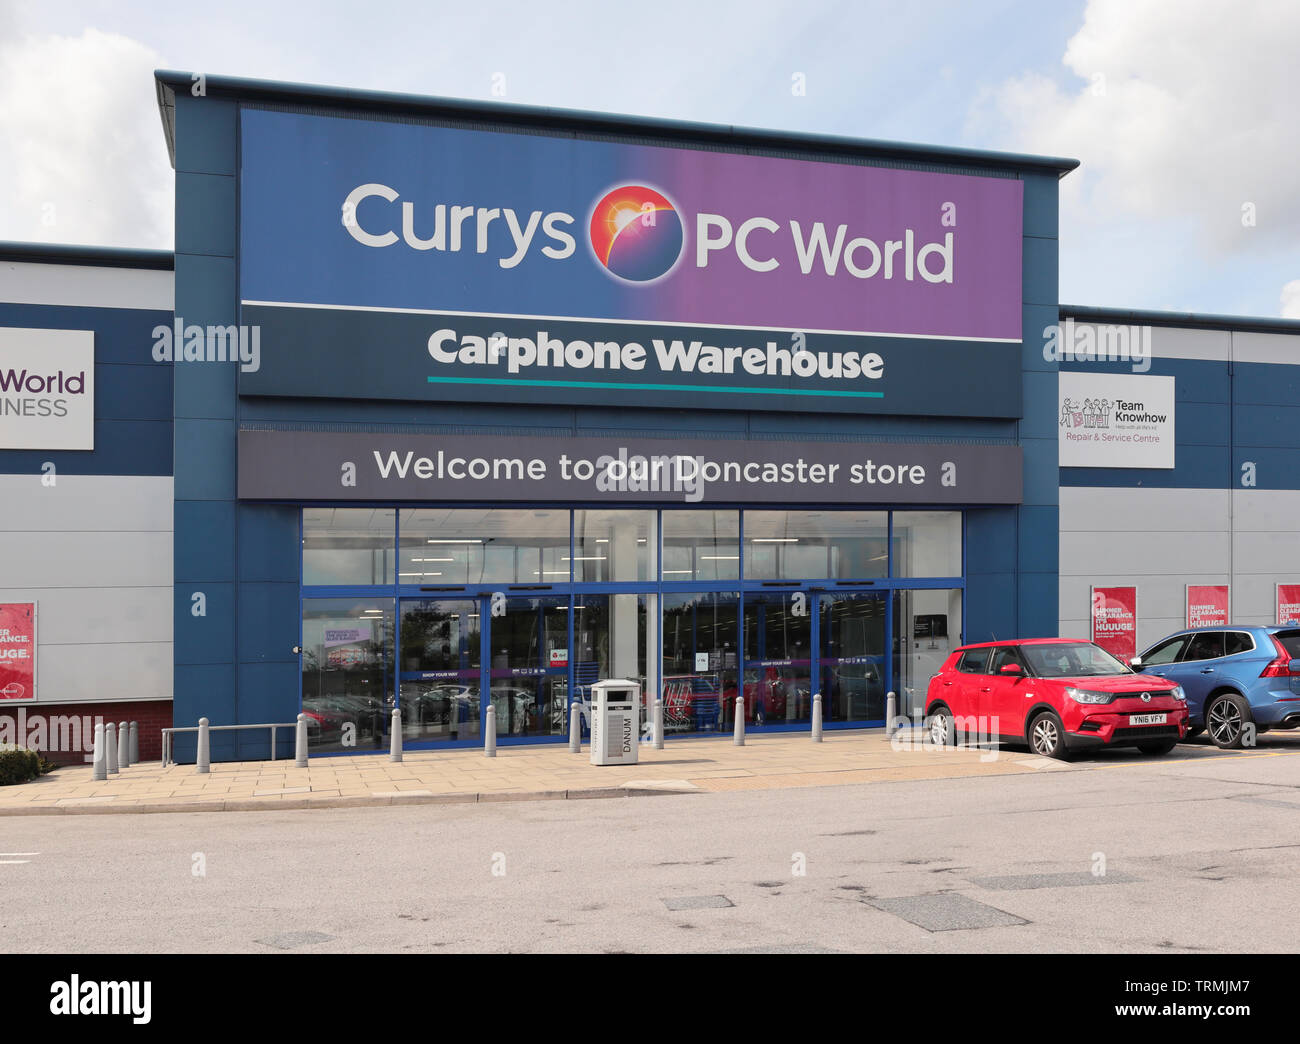 Currys PC World Carphone Warehouse Store Front Fascia, Doncaster, South Yorkshire, UK Stock Photo